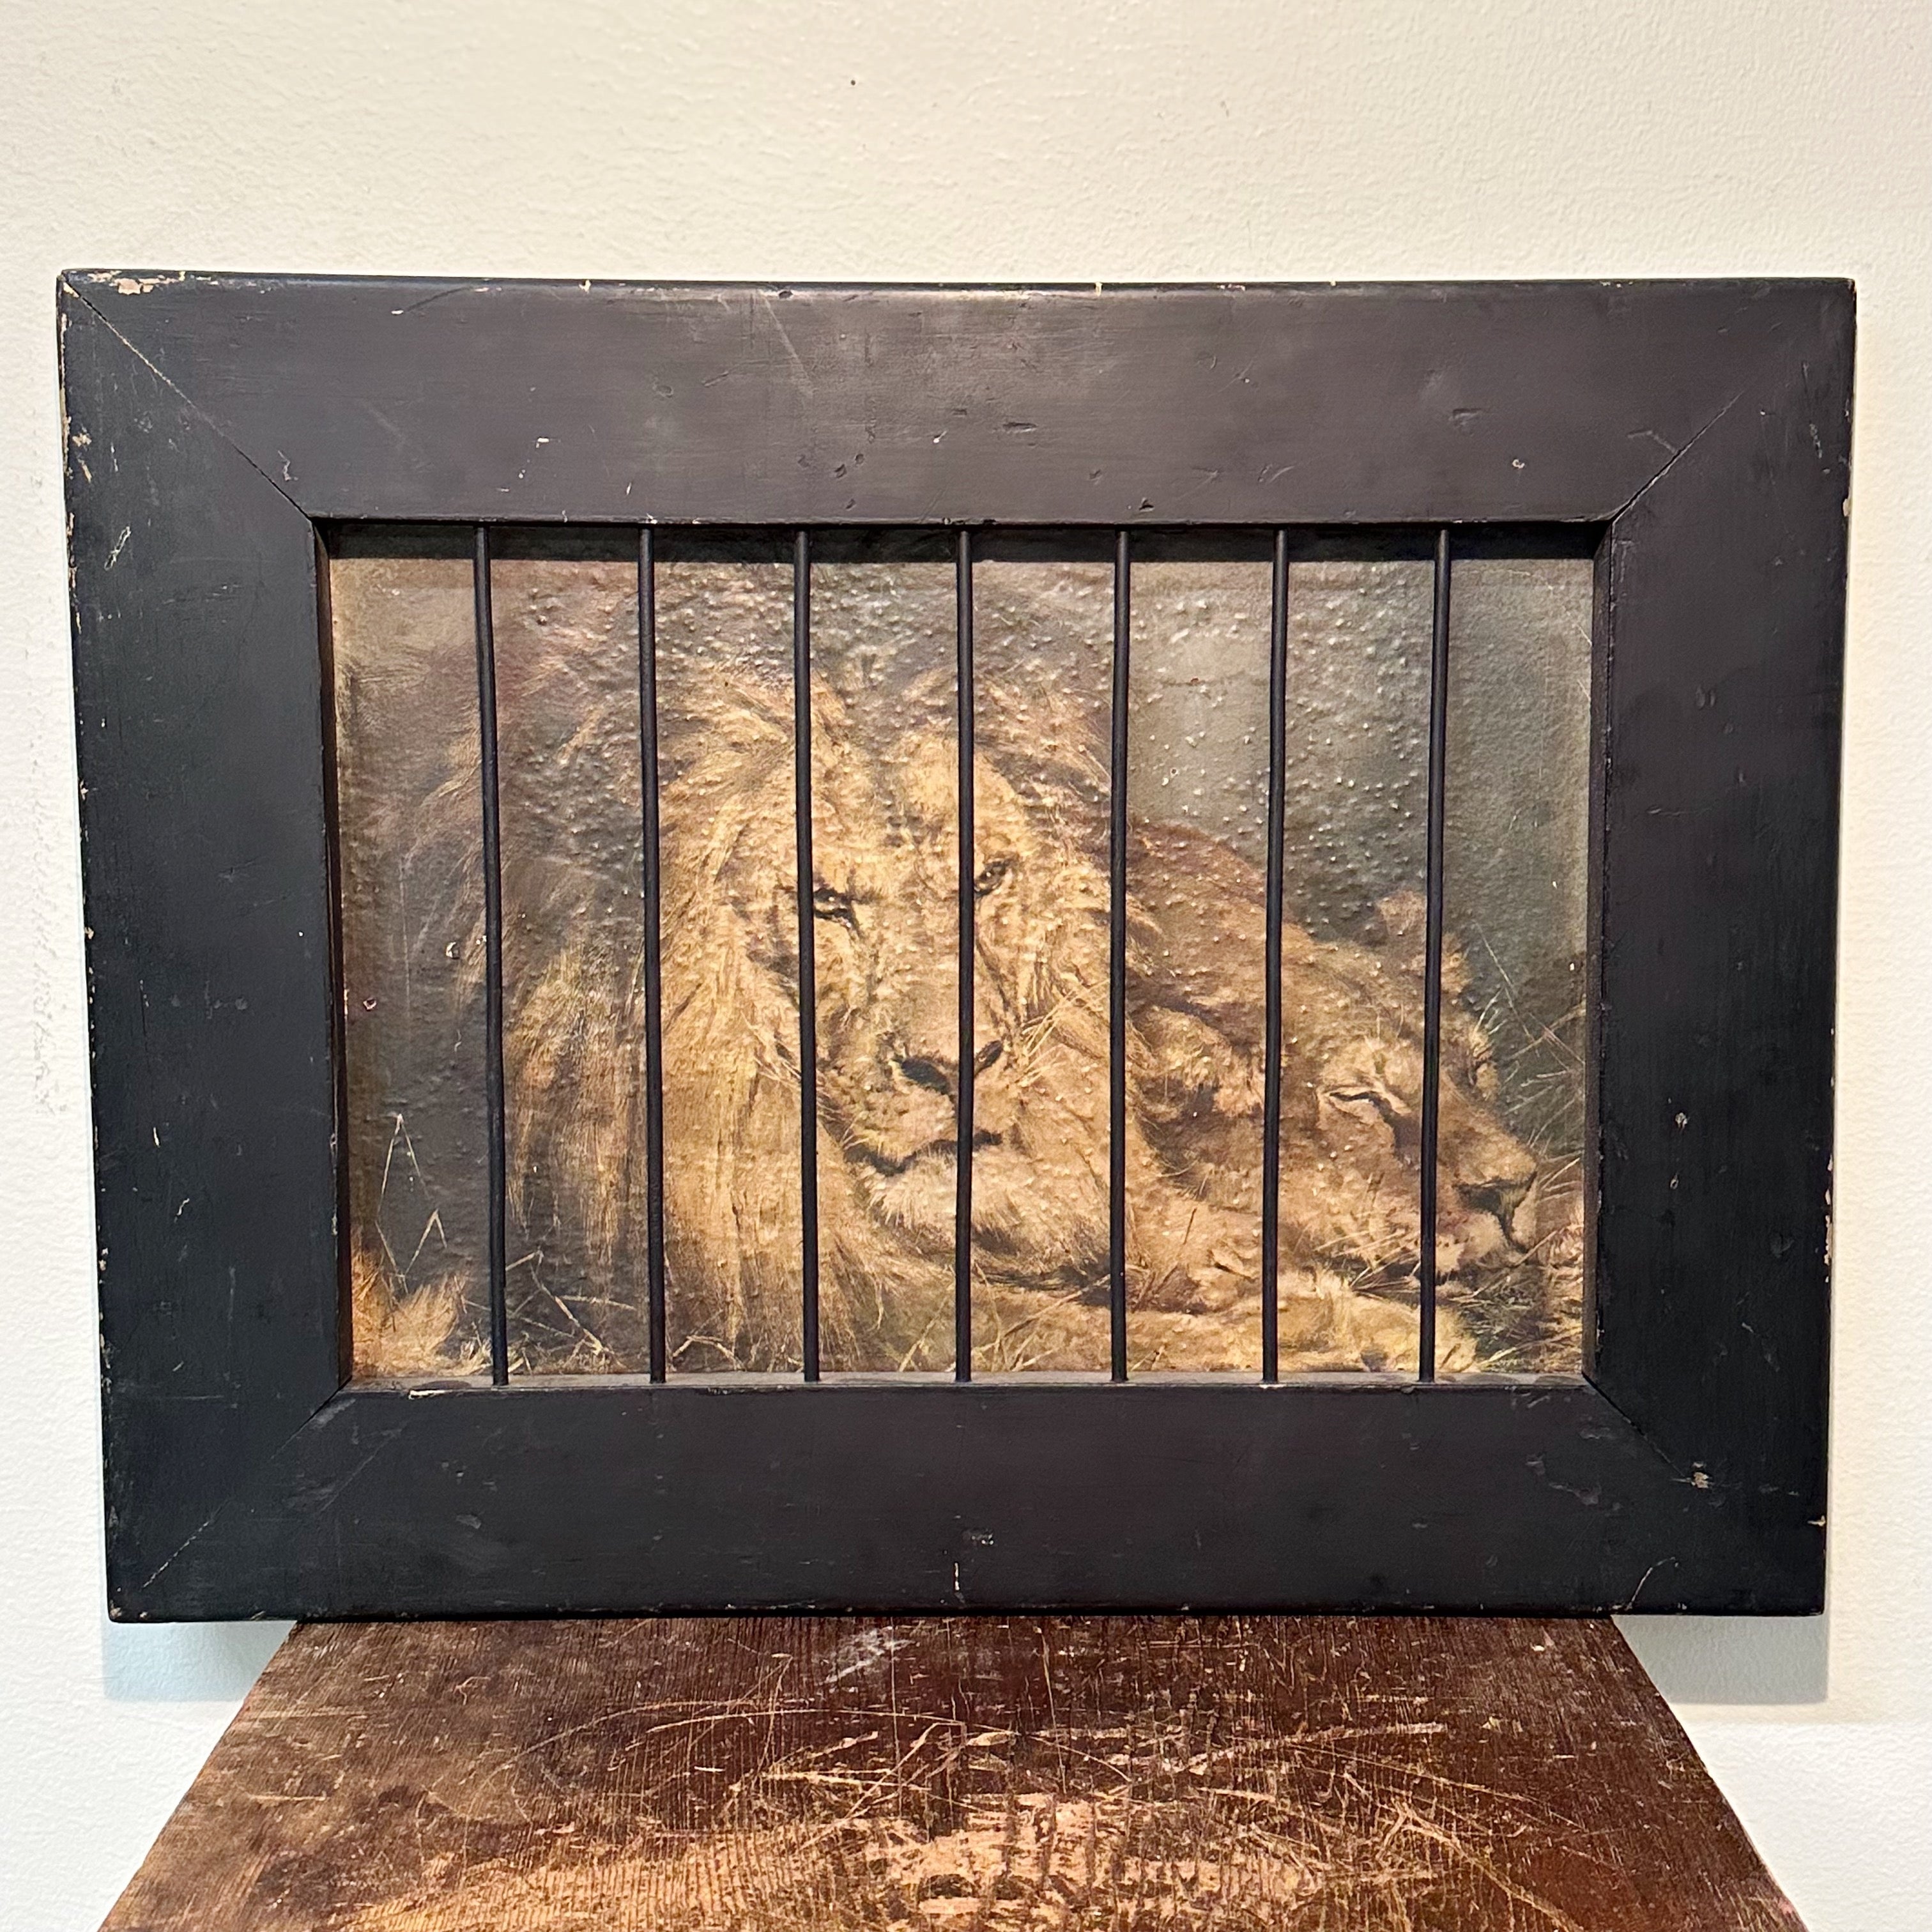 Rare Antique Shop of the Crafters Print of Two Lions at Rest Behind Wood Cage Frame - Early 1900s Gambling Association - Underground Artwork